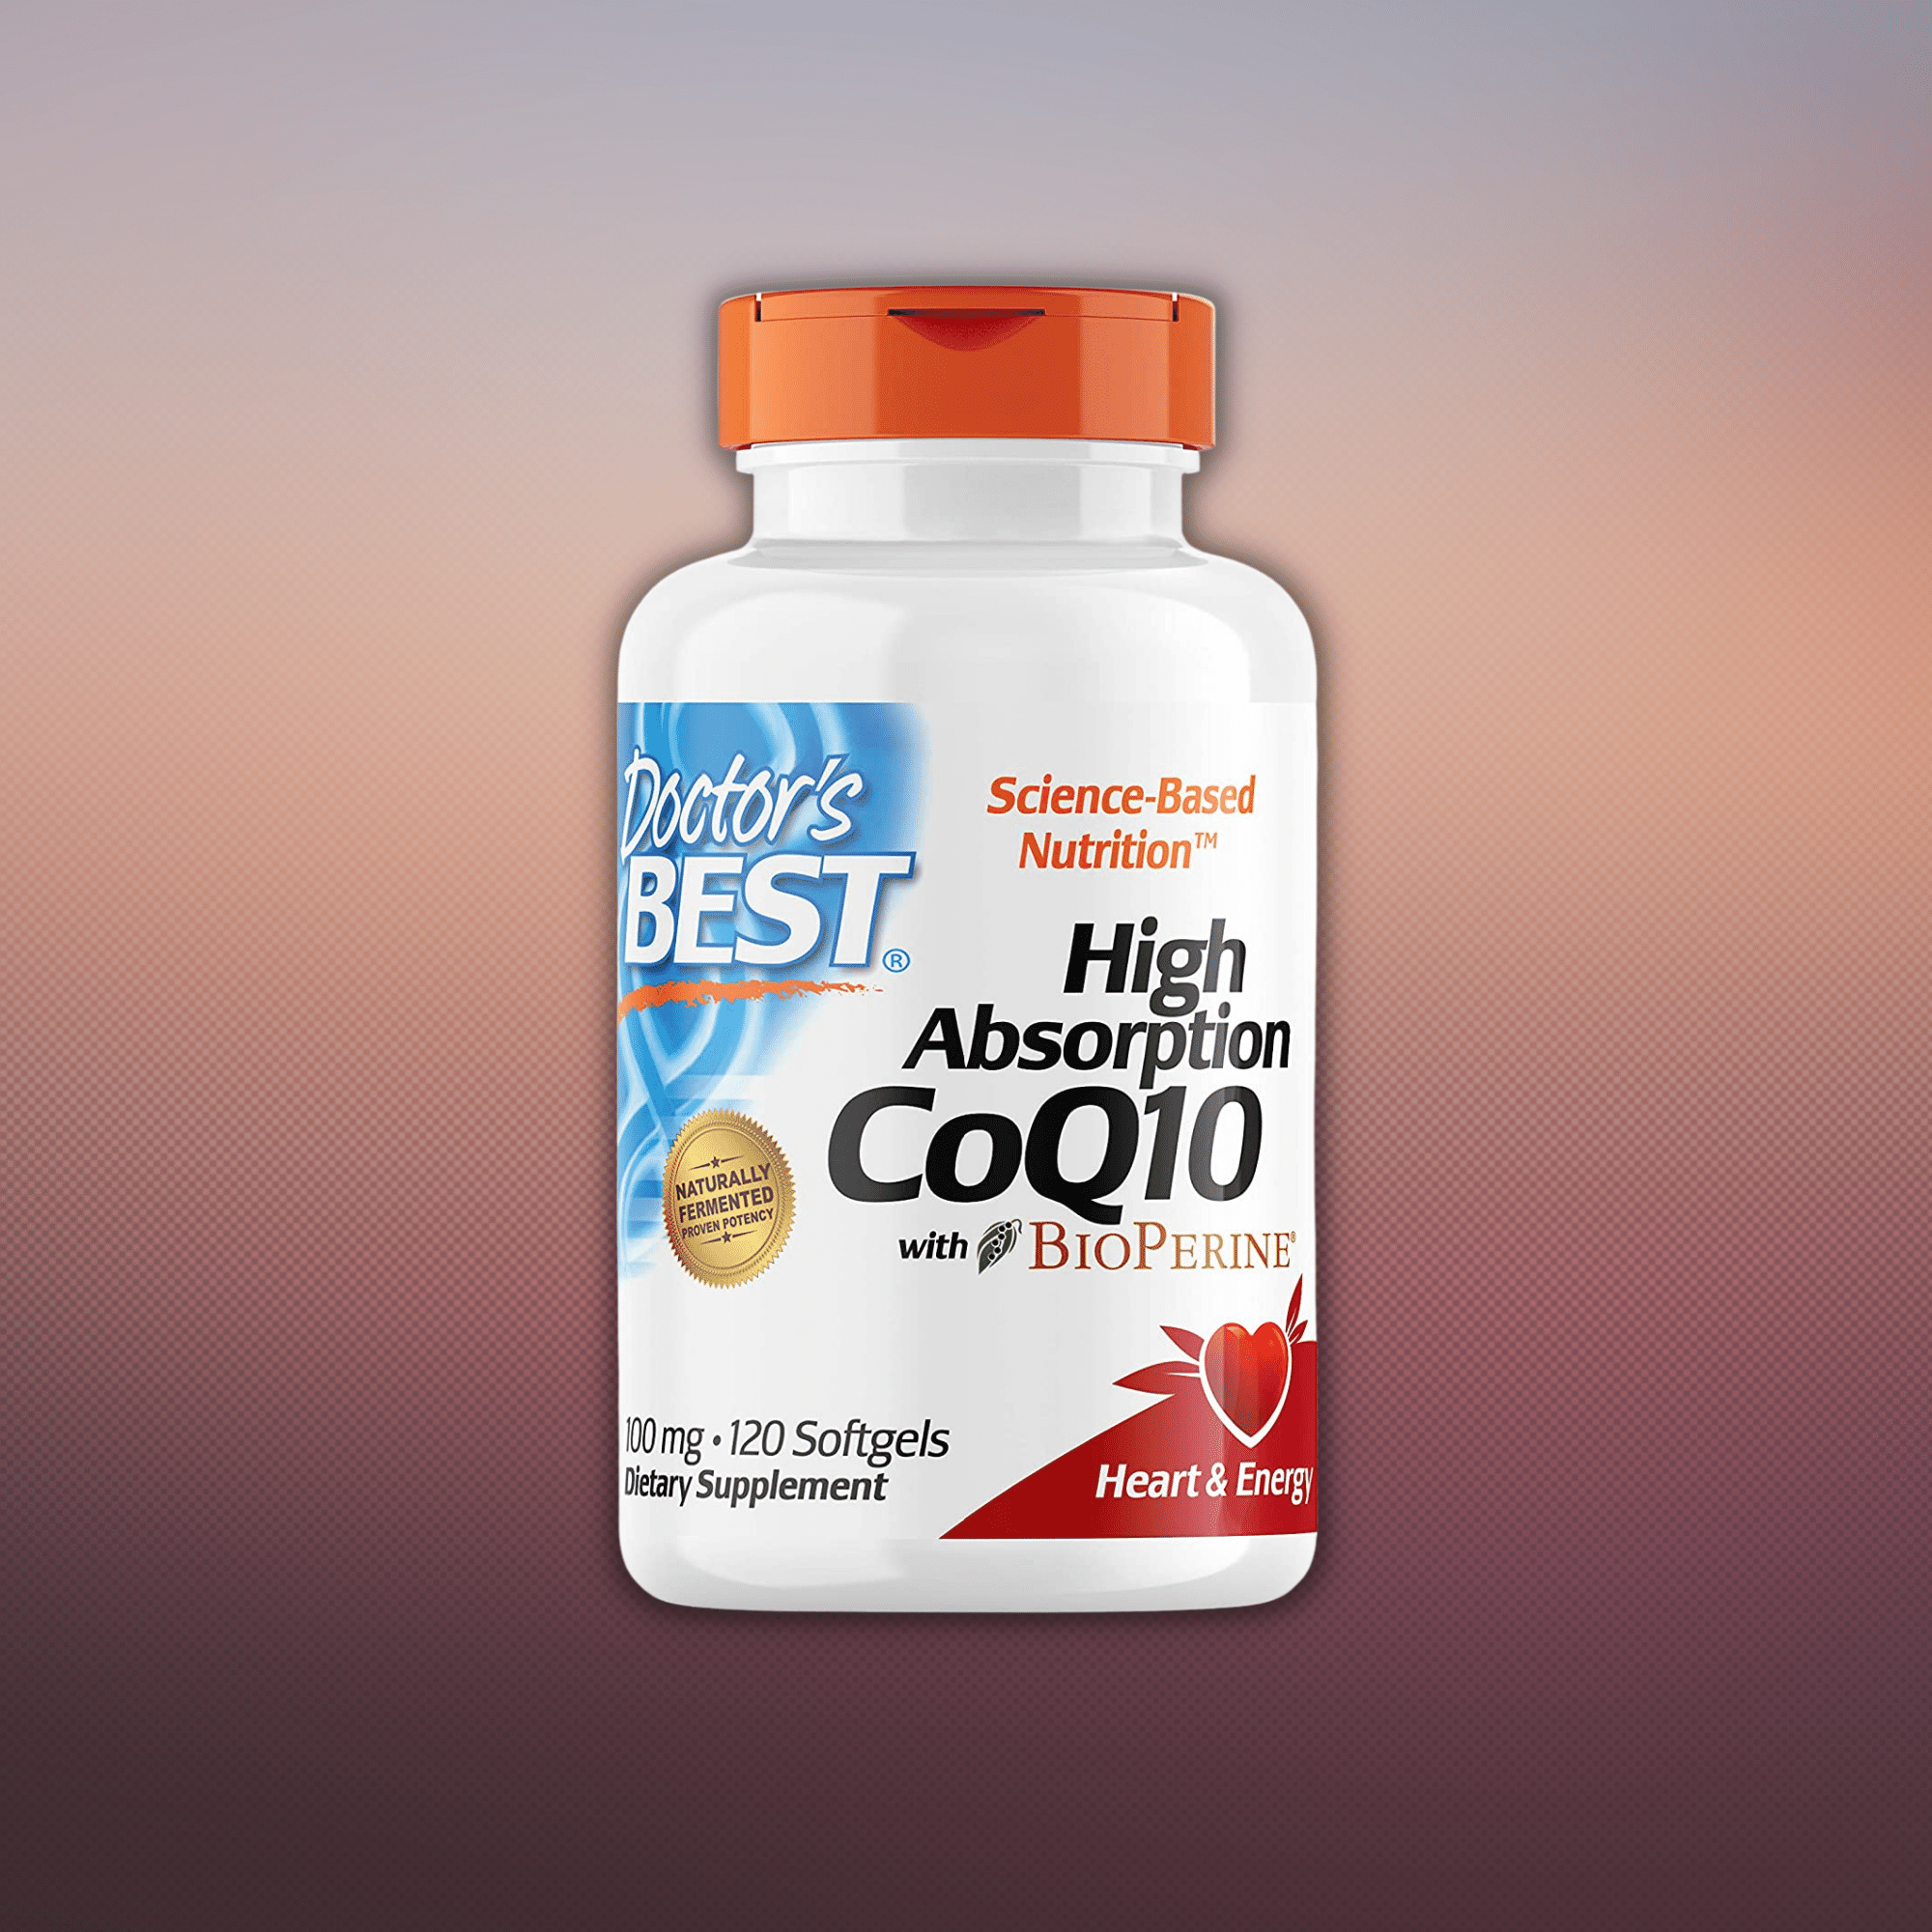 Coenzyme Q10 Supplement to Promote Heart Health and Give You A Boost of Energy That'll Help Through Your Workday